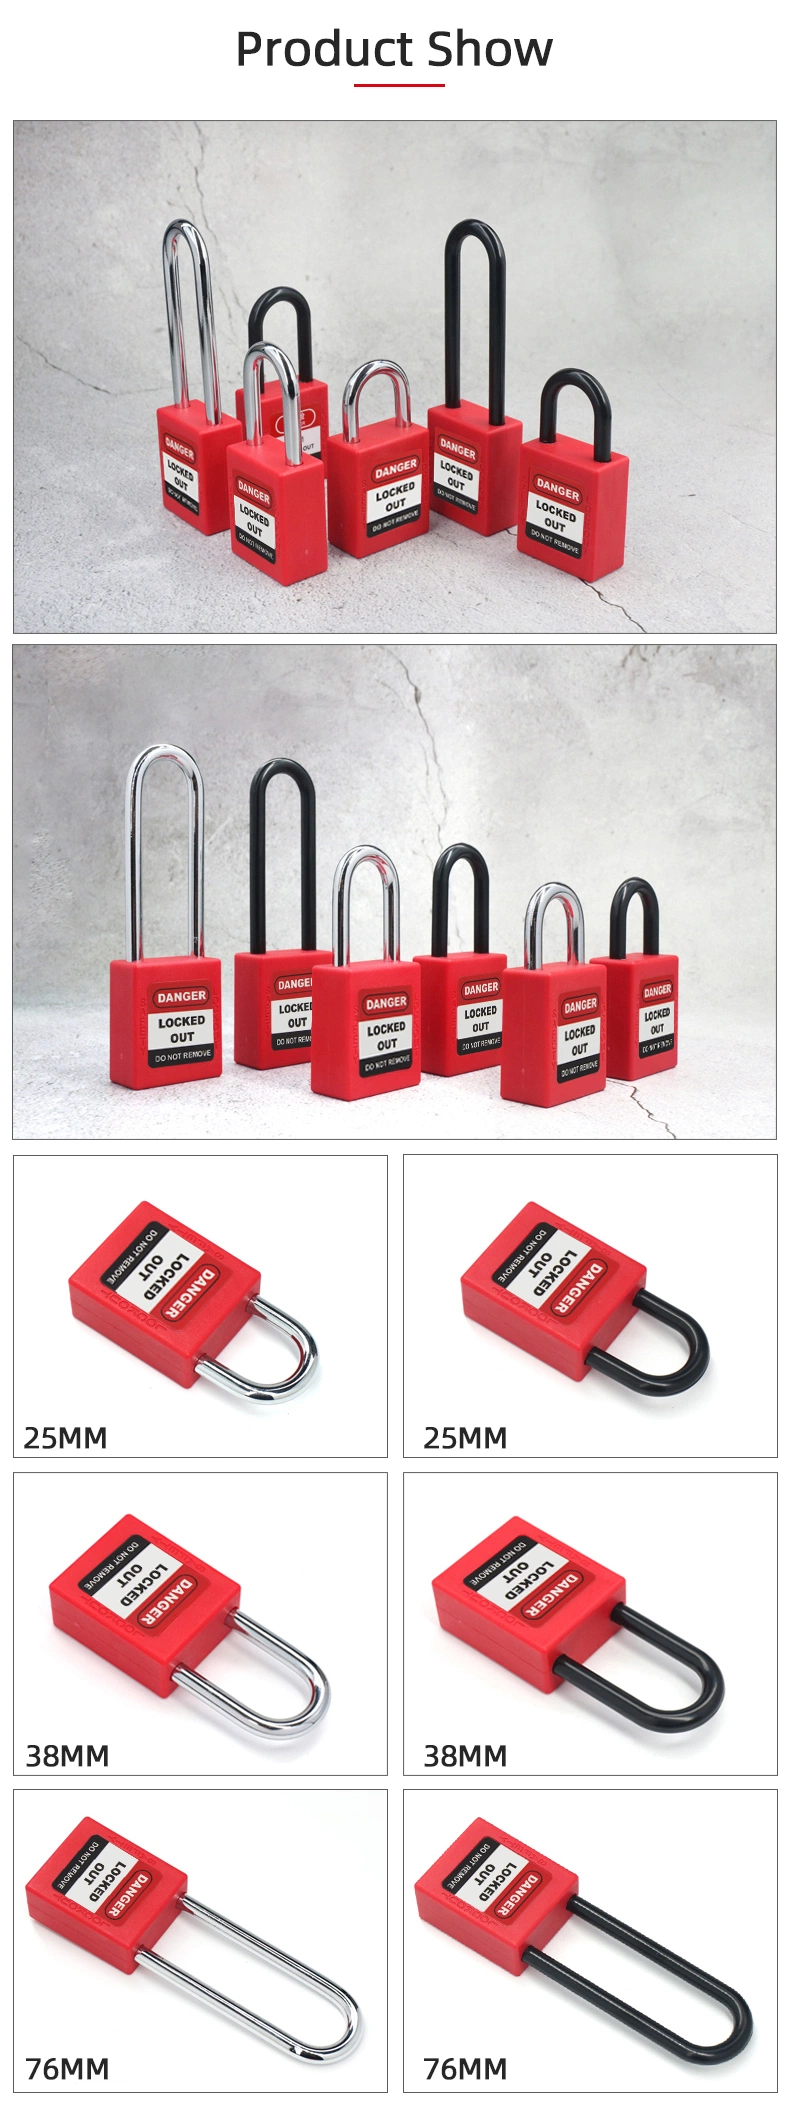 38mm Nylon Shackle Dust Proof Safety Padlock Wholesale Industry Lockout Tagout